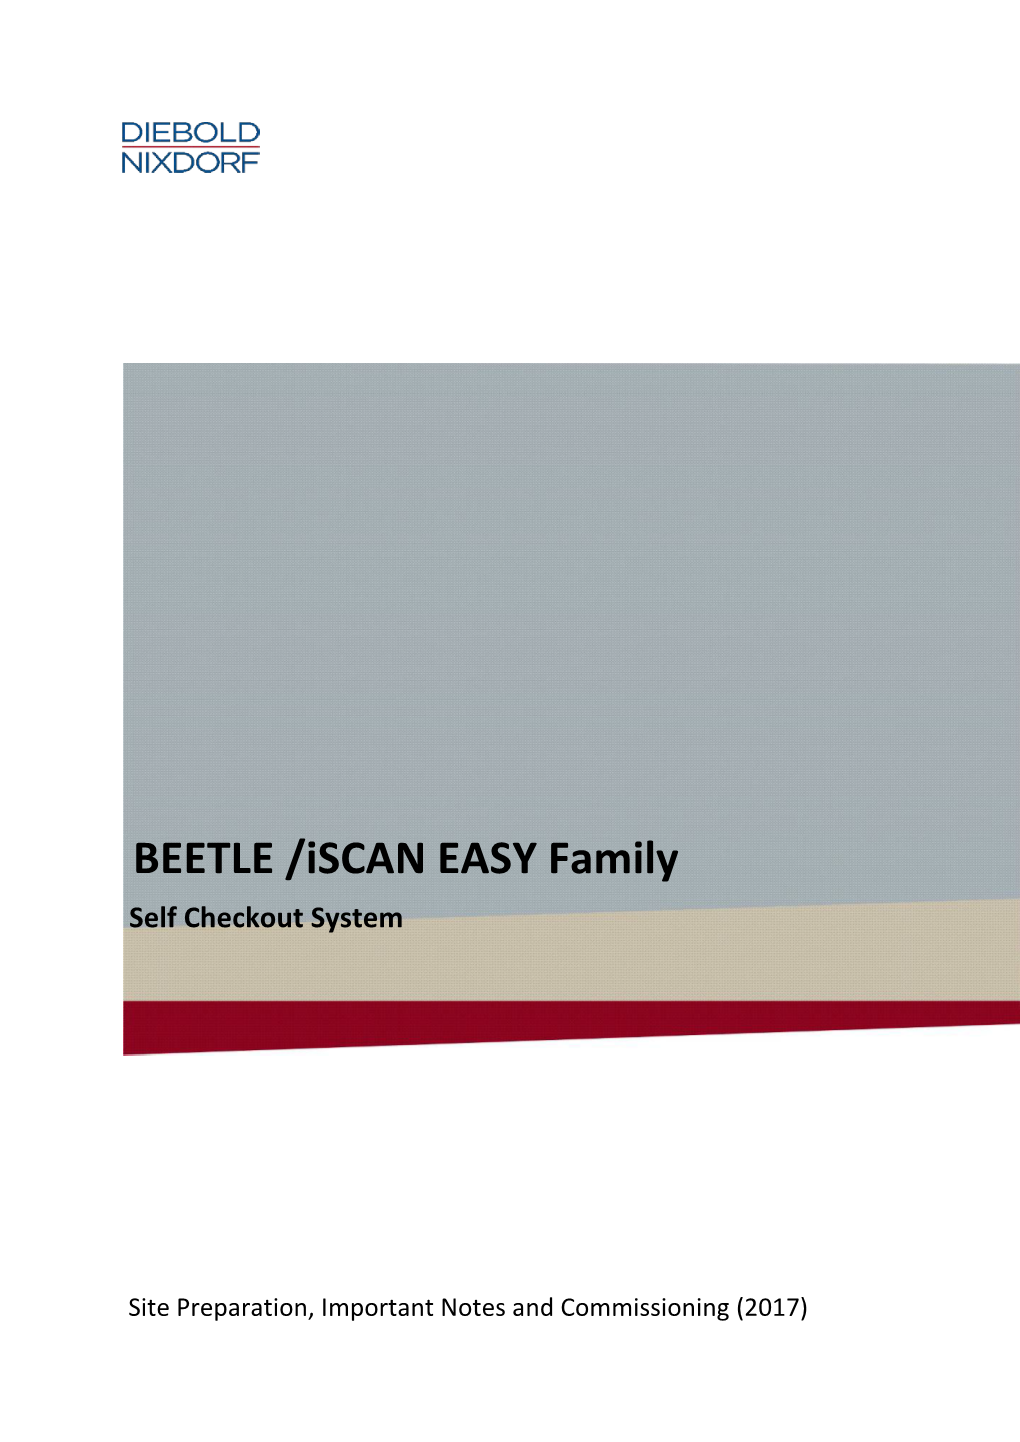 BEETLE /Iscan EASY Family Self Checkout System